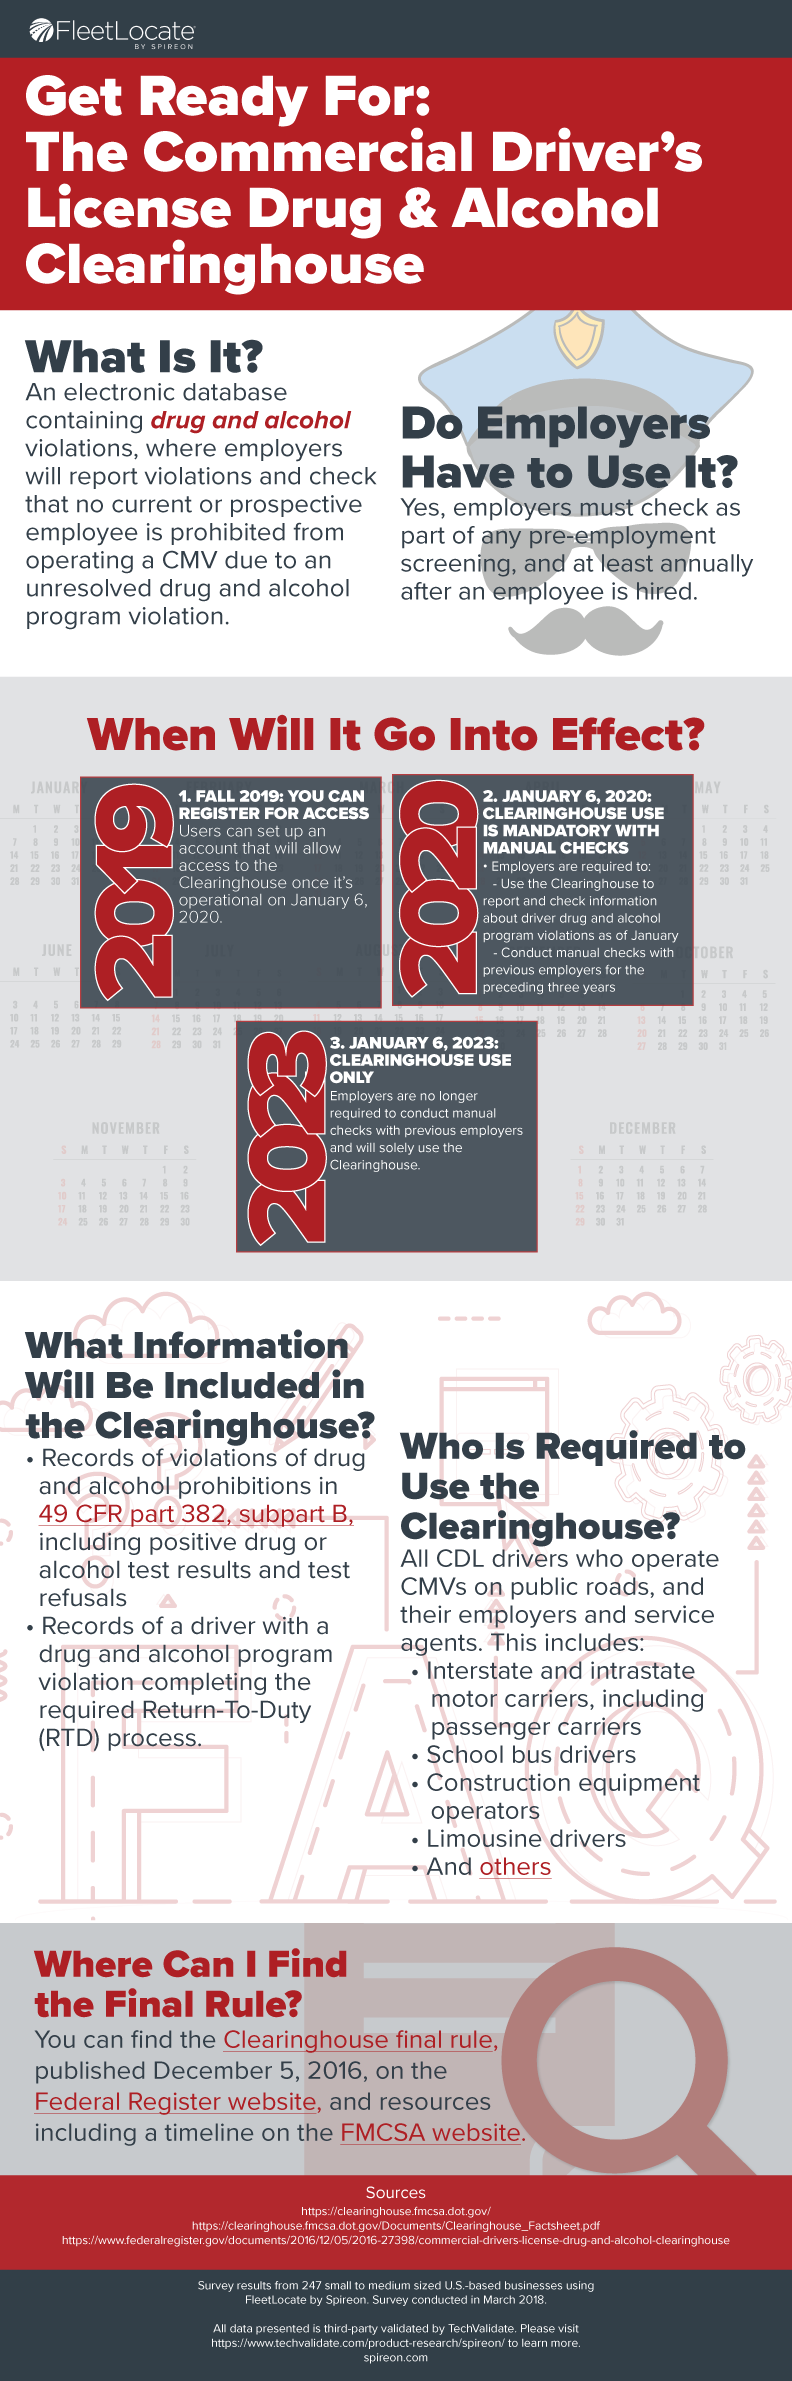 Drug & Alcohol Clearinghouse Infographic